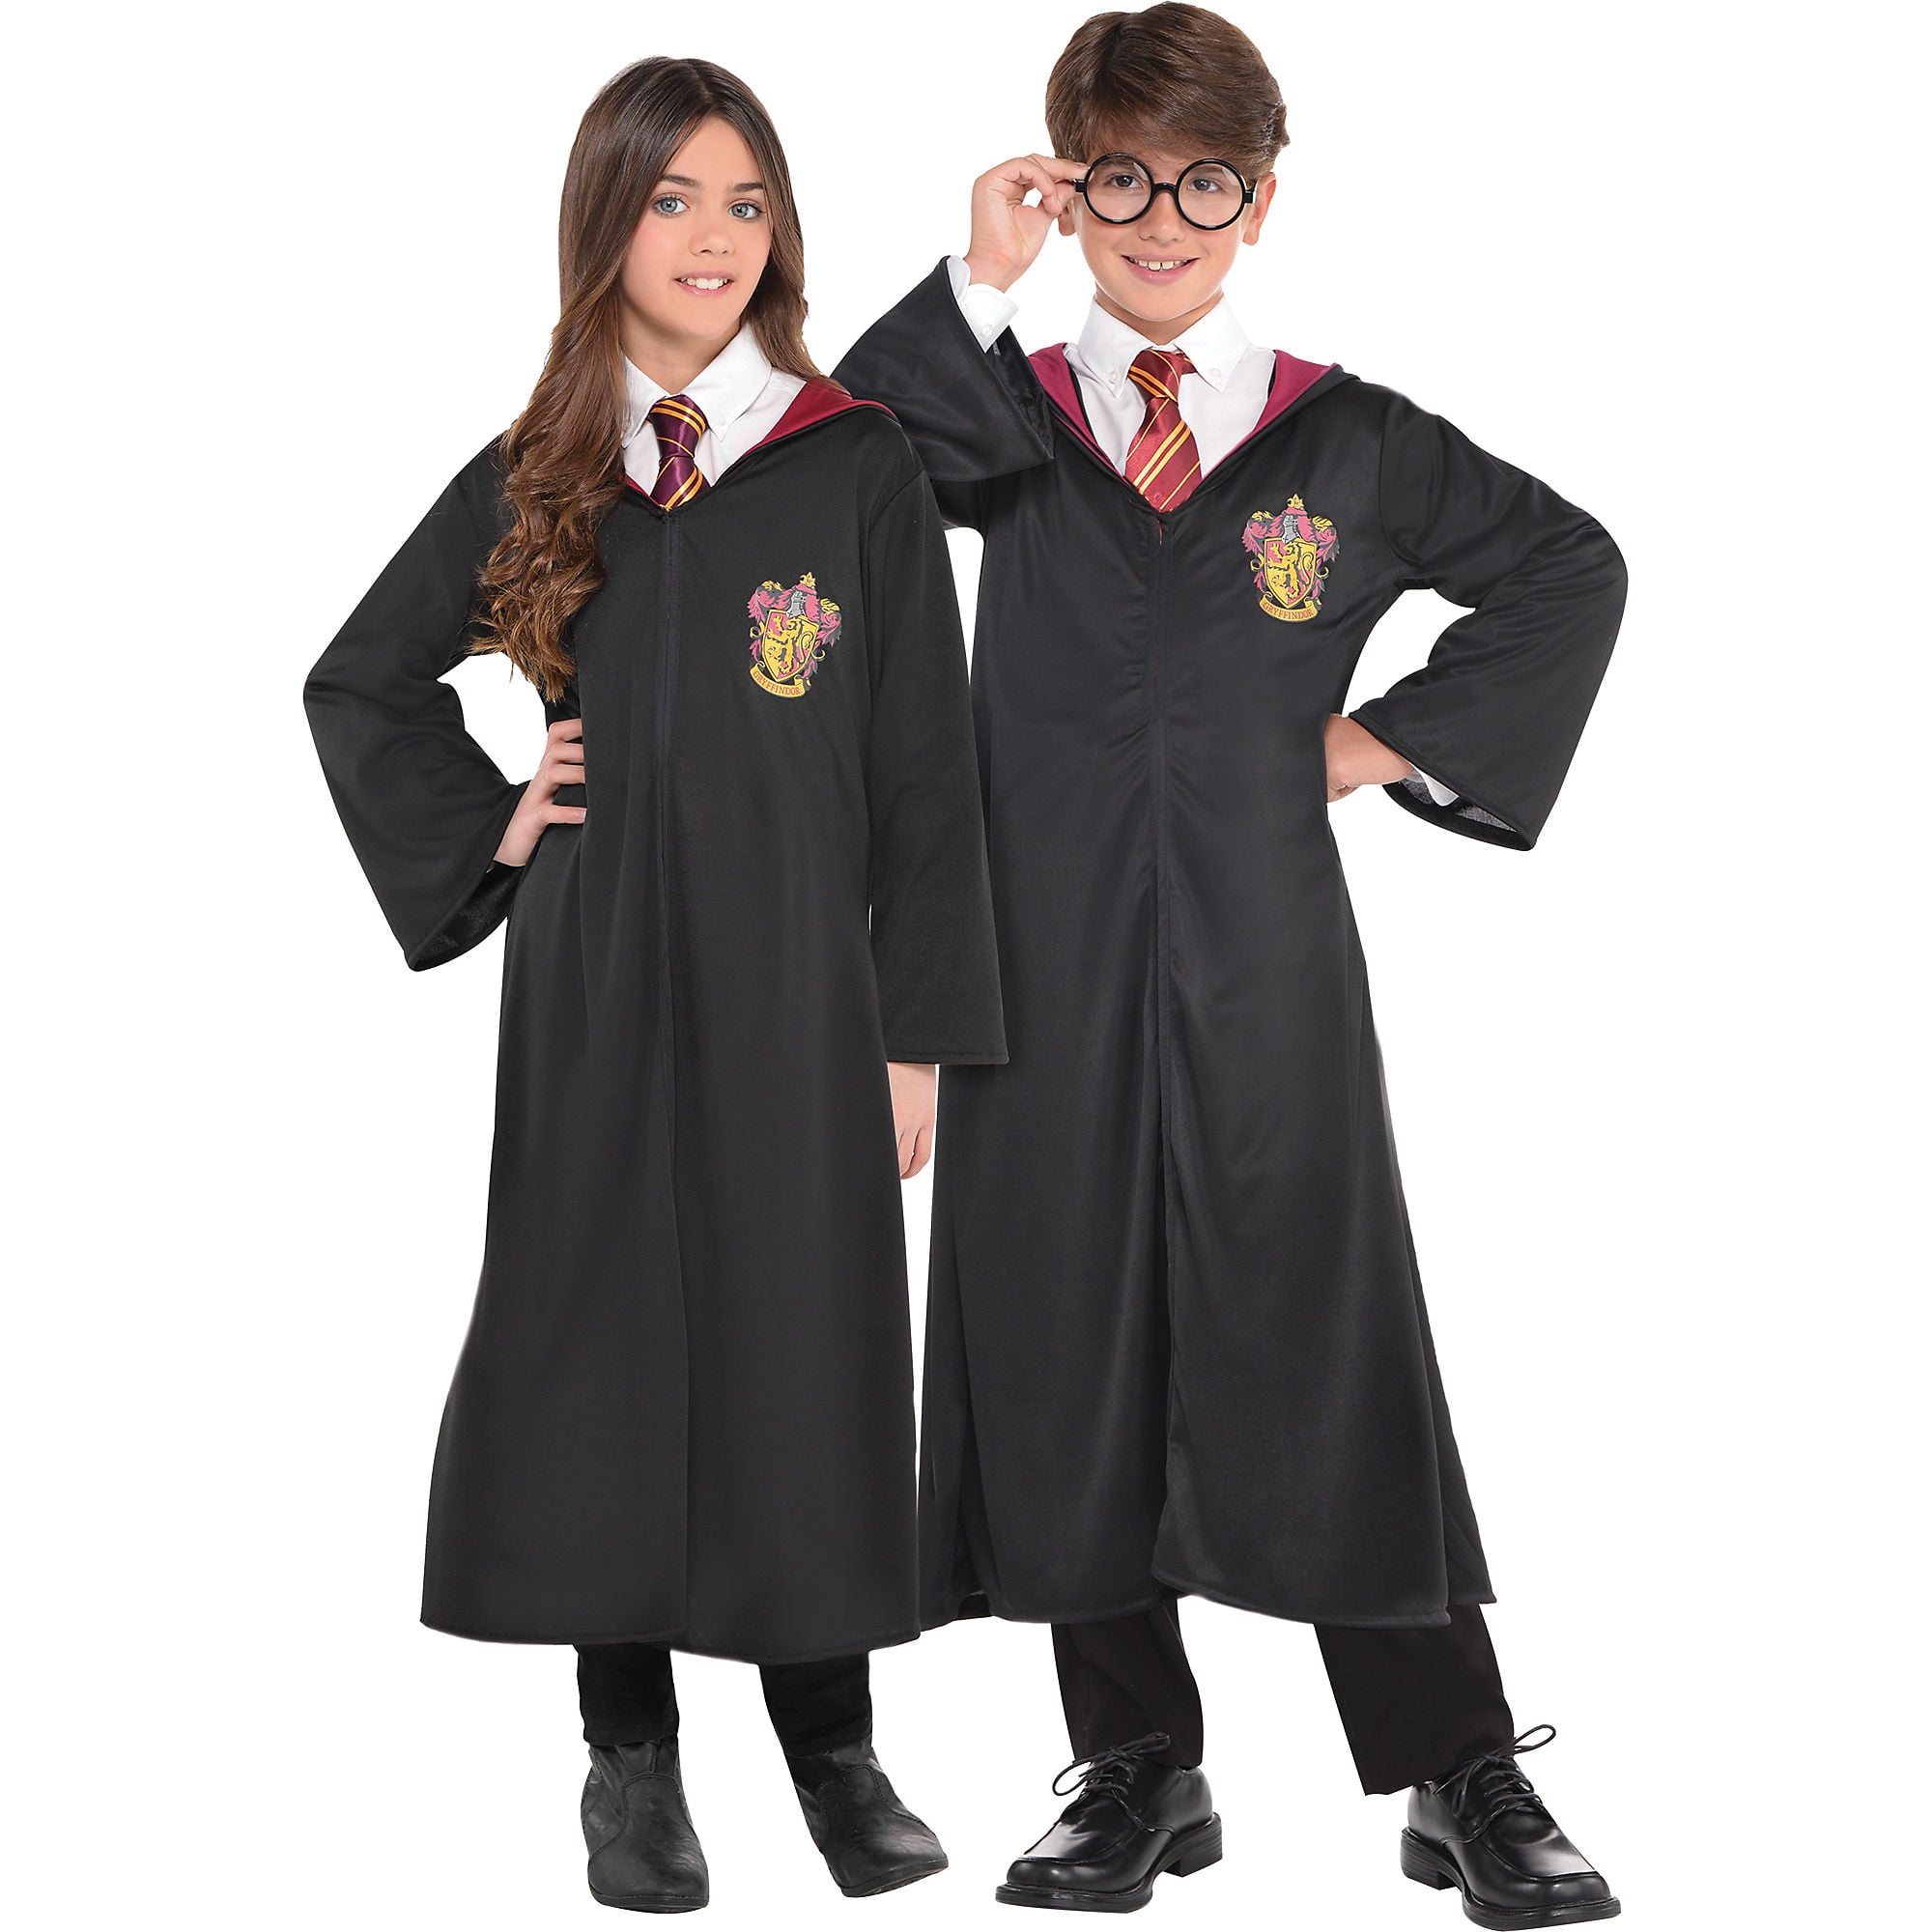 Gryffindor Robe, Harry Potter Halloween Costume for Kids, Large/Extra ...